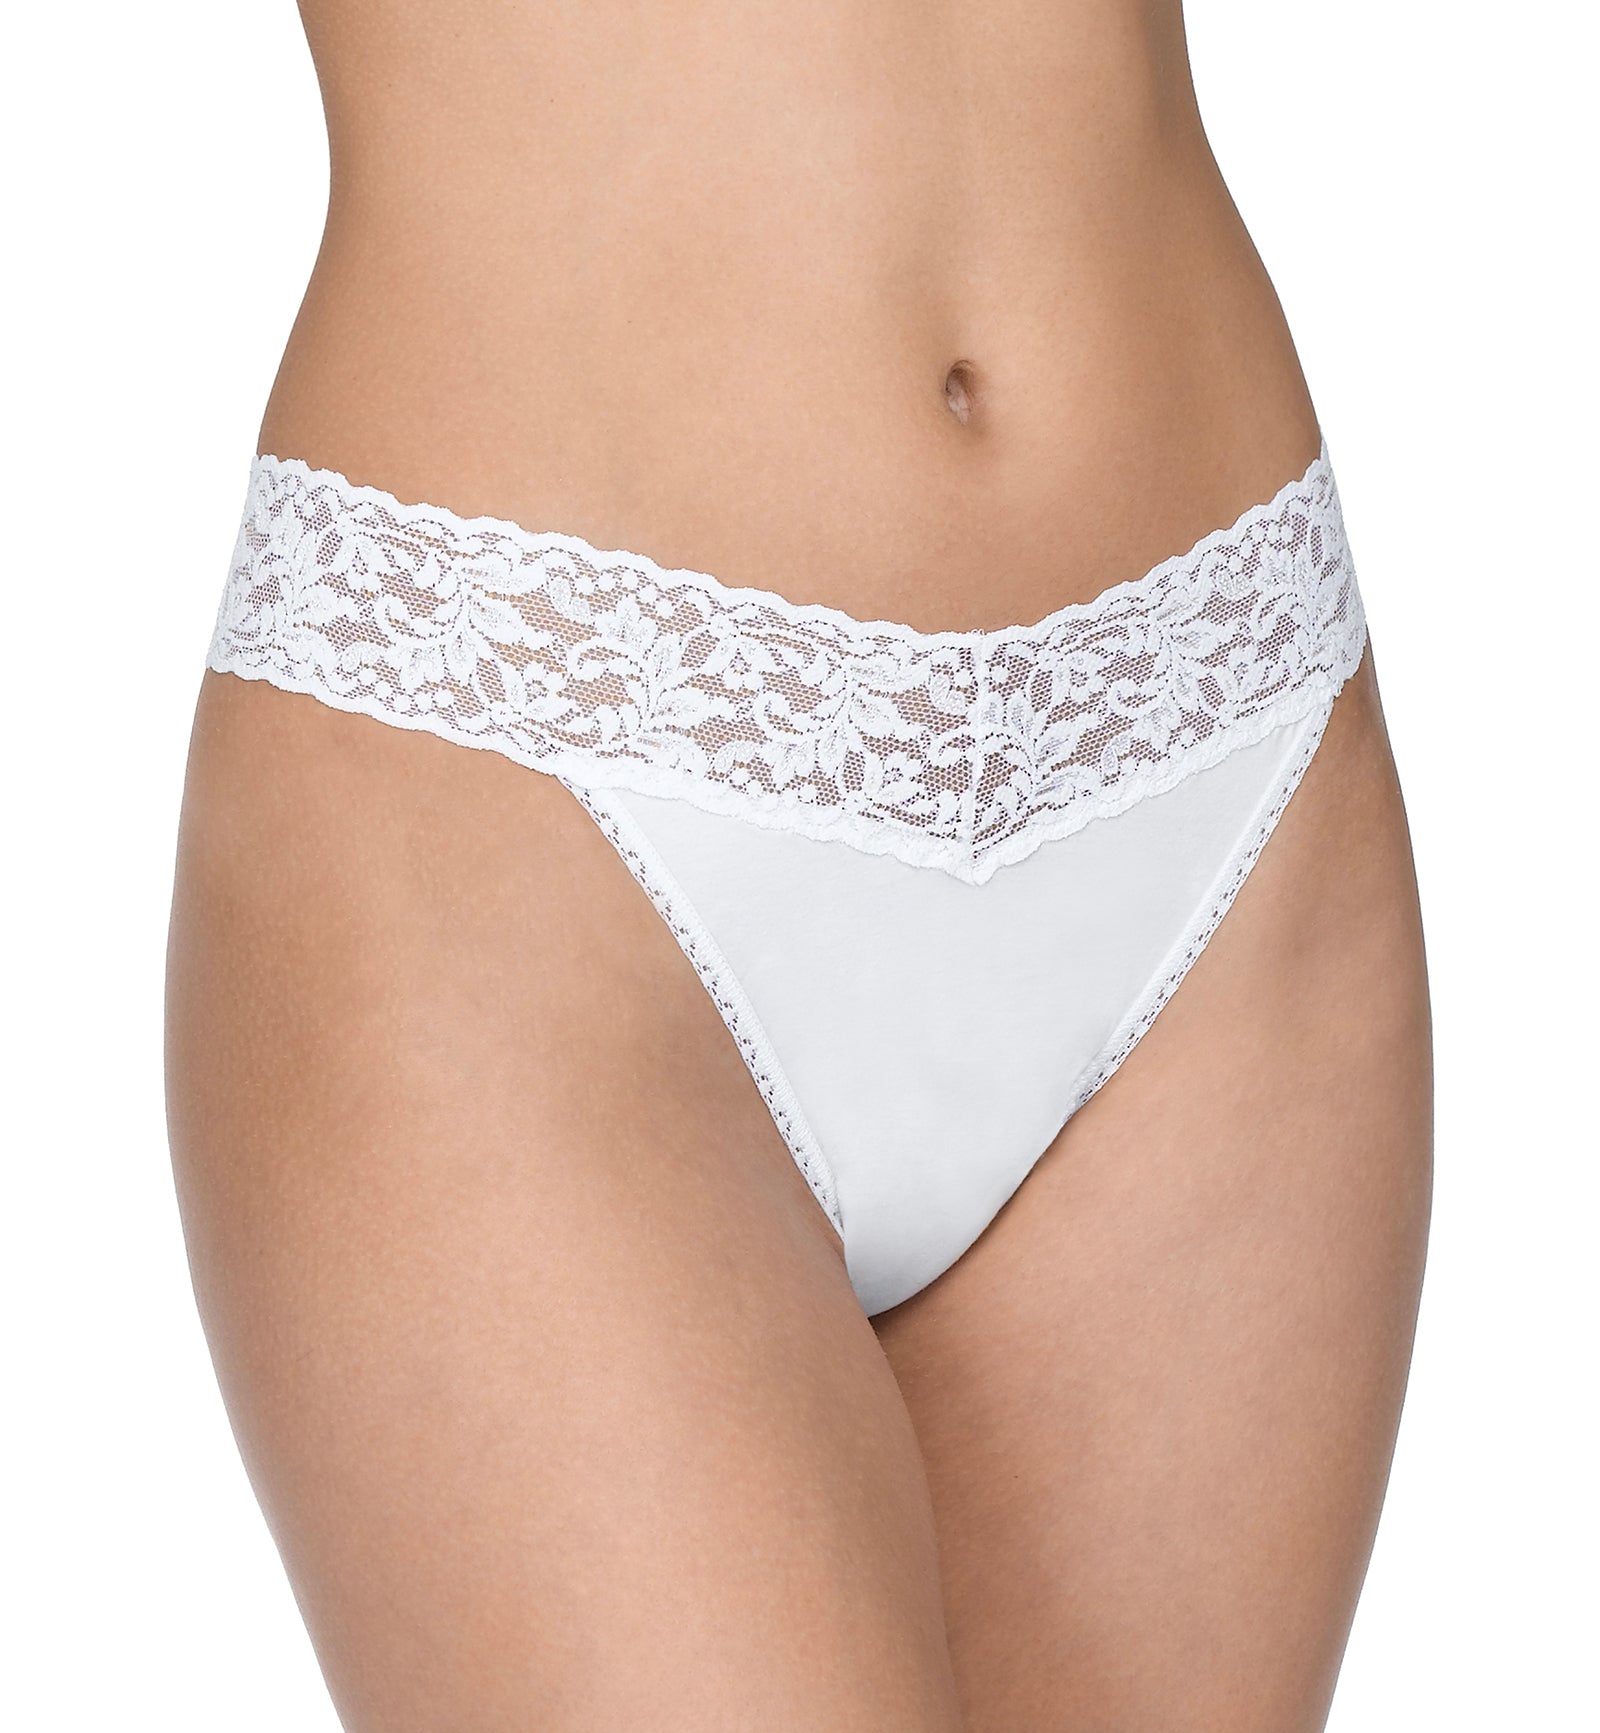 Hanky Panky Original Rise Organic Cotton Thong with Lace (891801),White - White,One Size